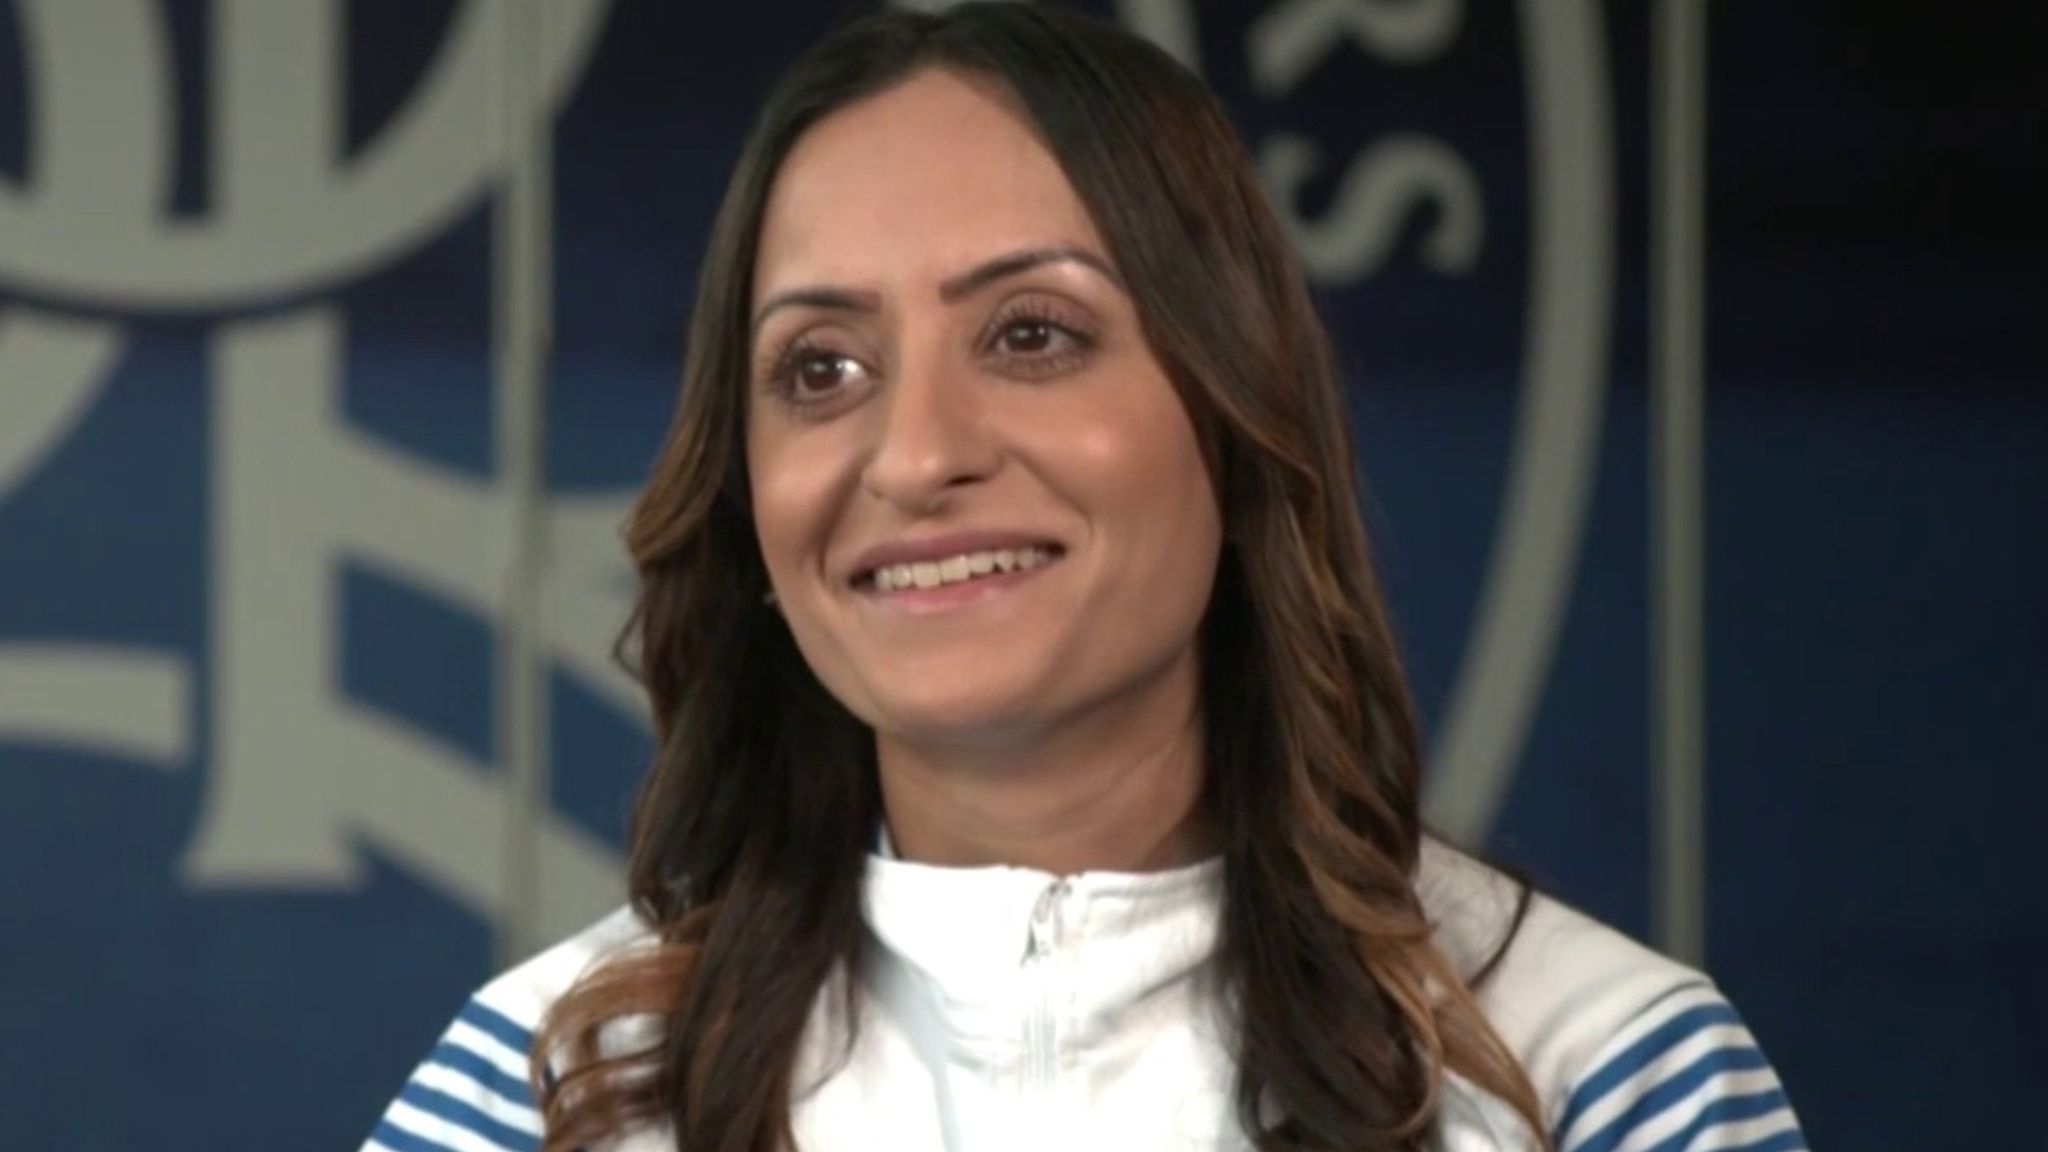 QPR trailblazer Manisha Tailor MBE says British South Asian voices in  football need to be amplified | Football News | Sky Sports